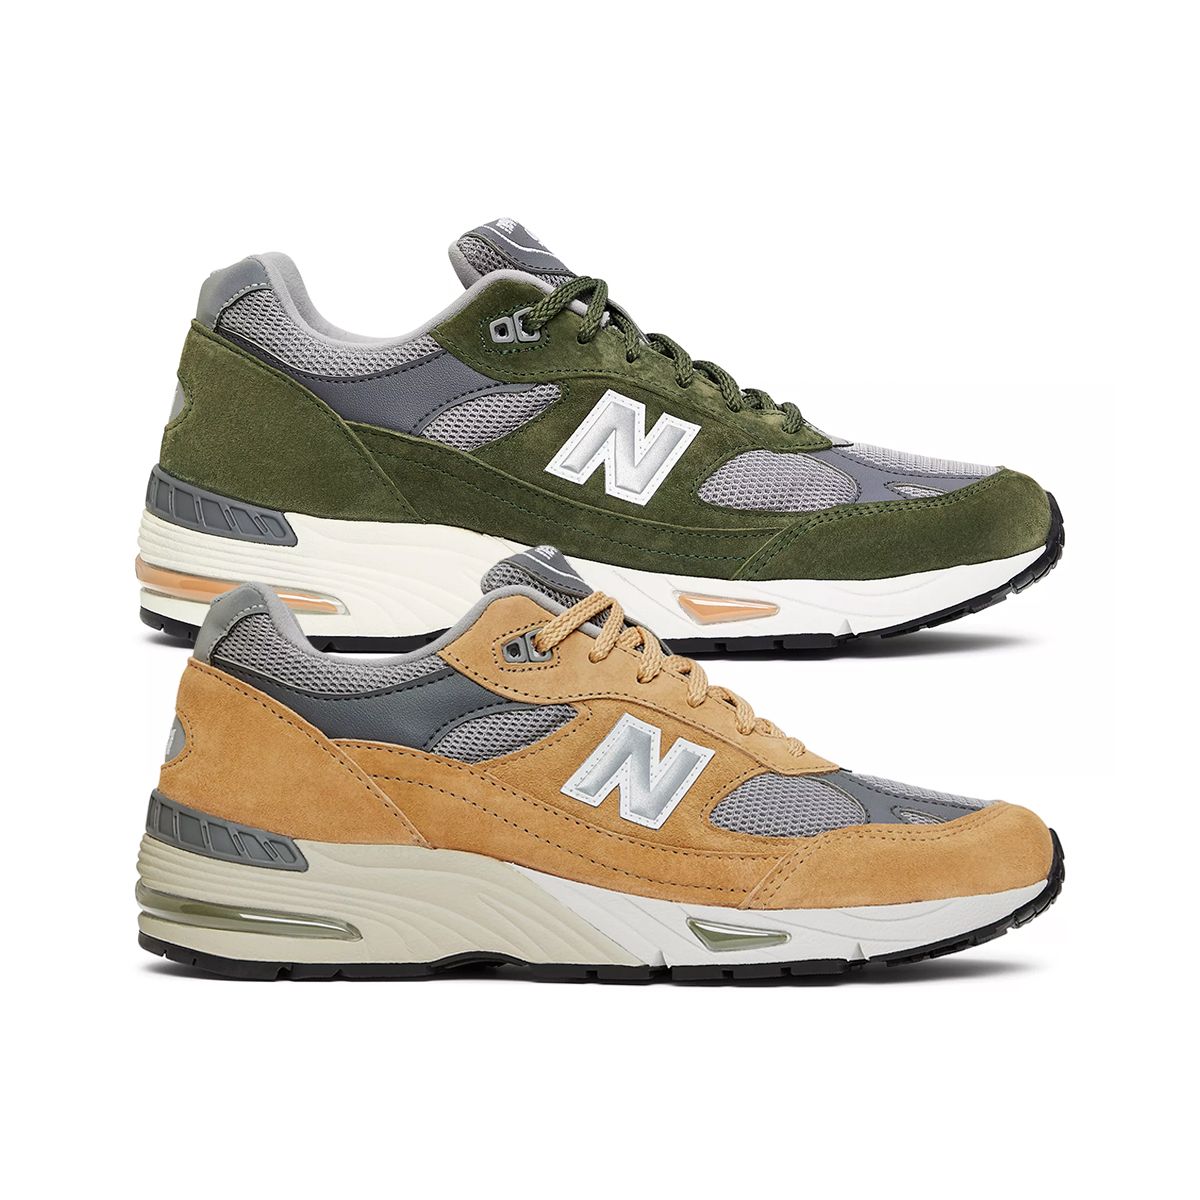 The New Balance 991 Made in UK is Available Now is Tan and Olive 